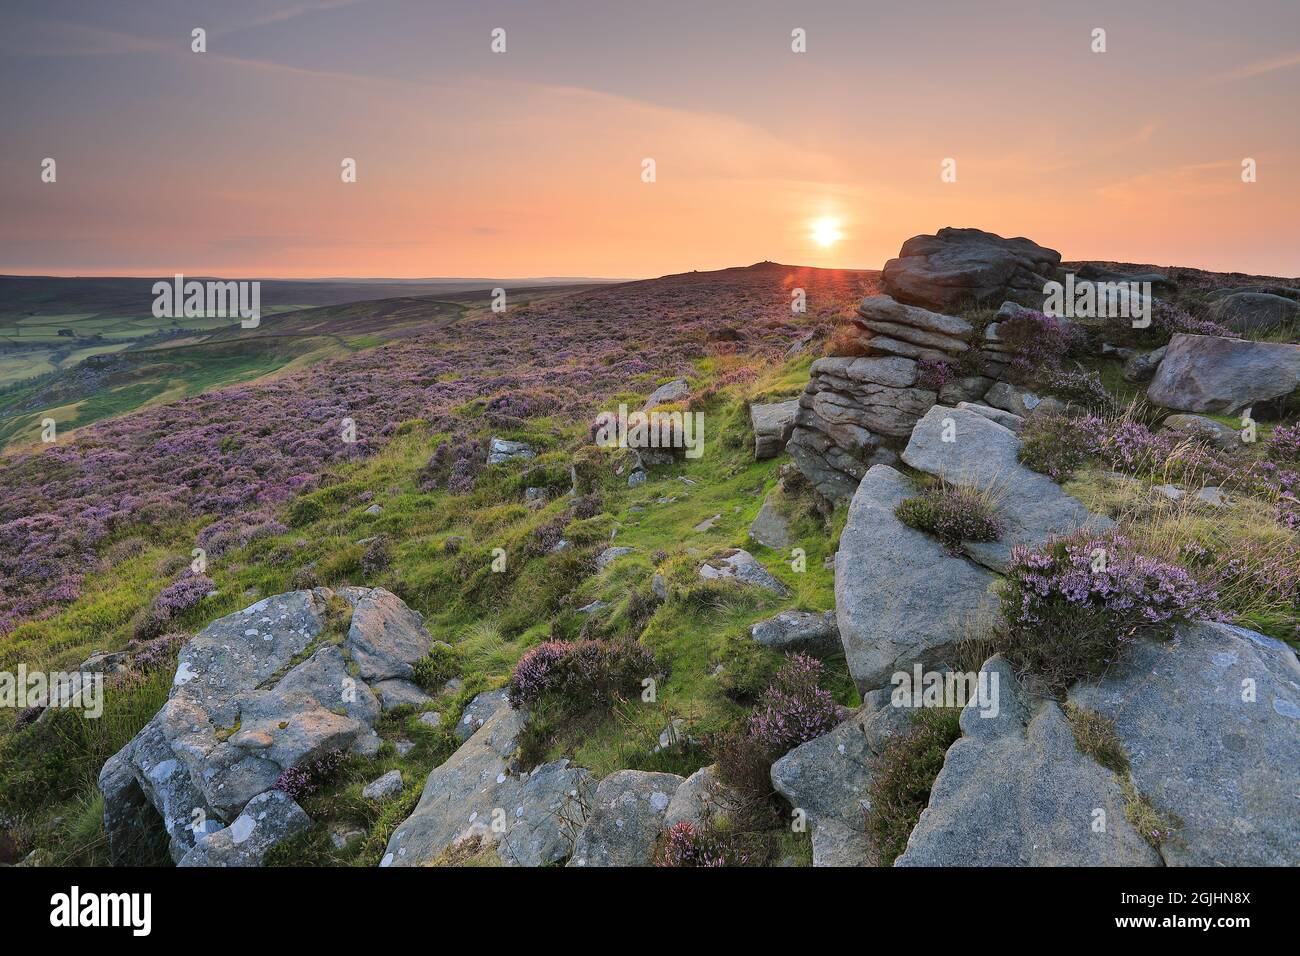 The sun rises over an outcrop of gritstone on the summit of Beamsley Beacon, a hill in Wharfedale, Yorkshire Dales National Park, UK Stock Photo